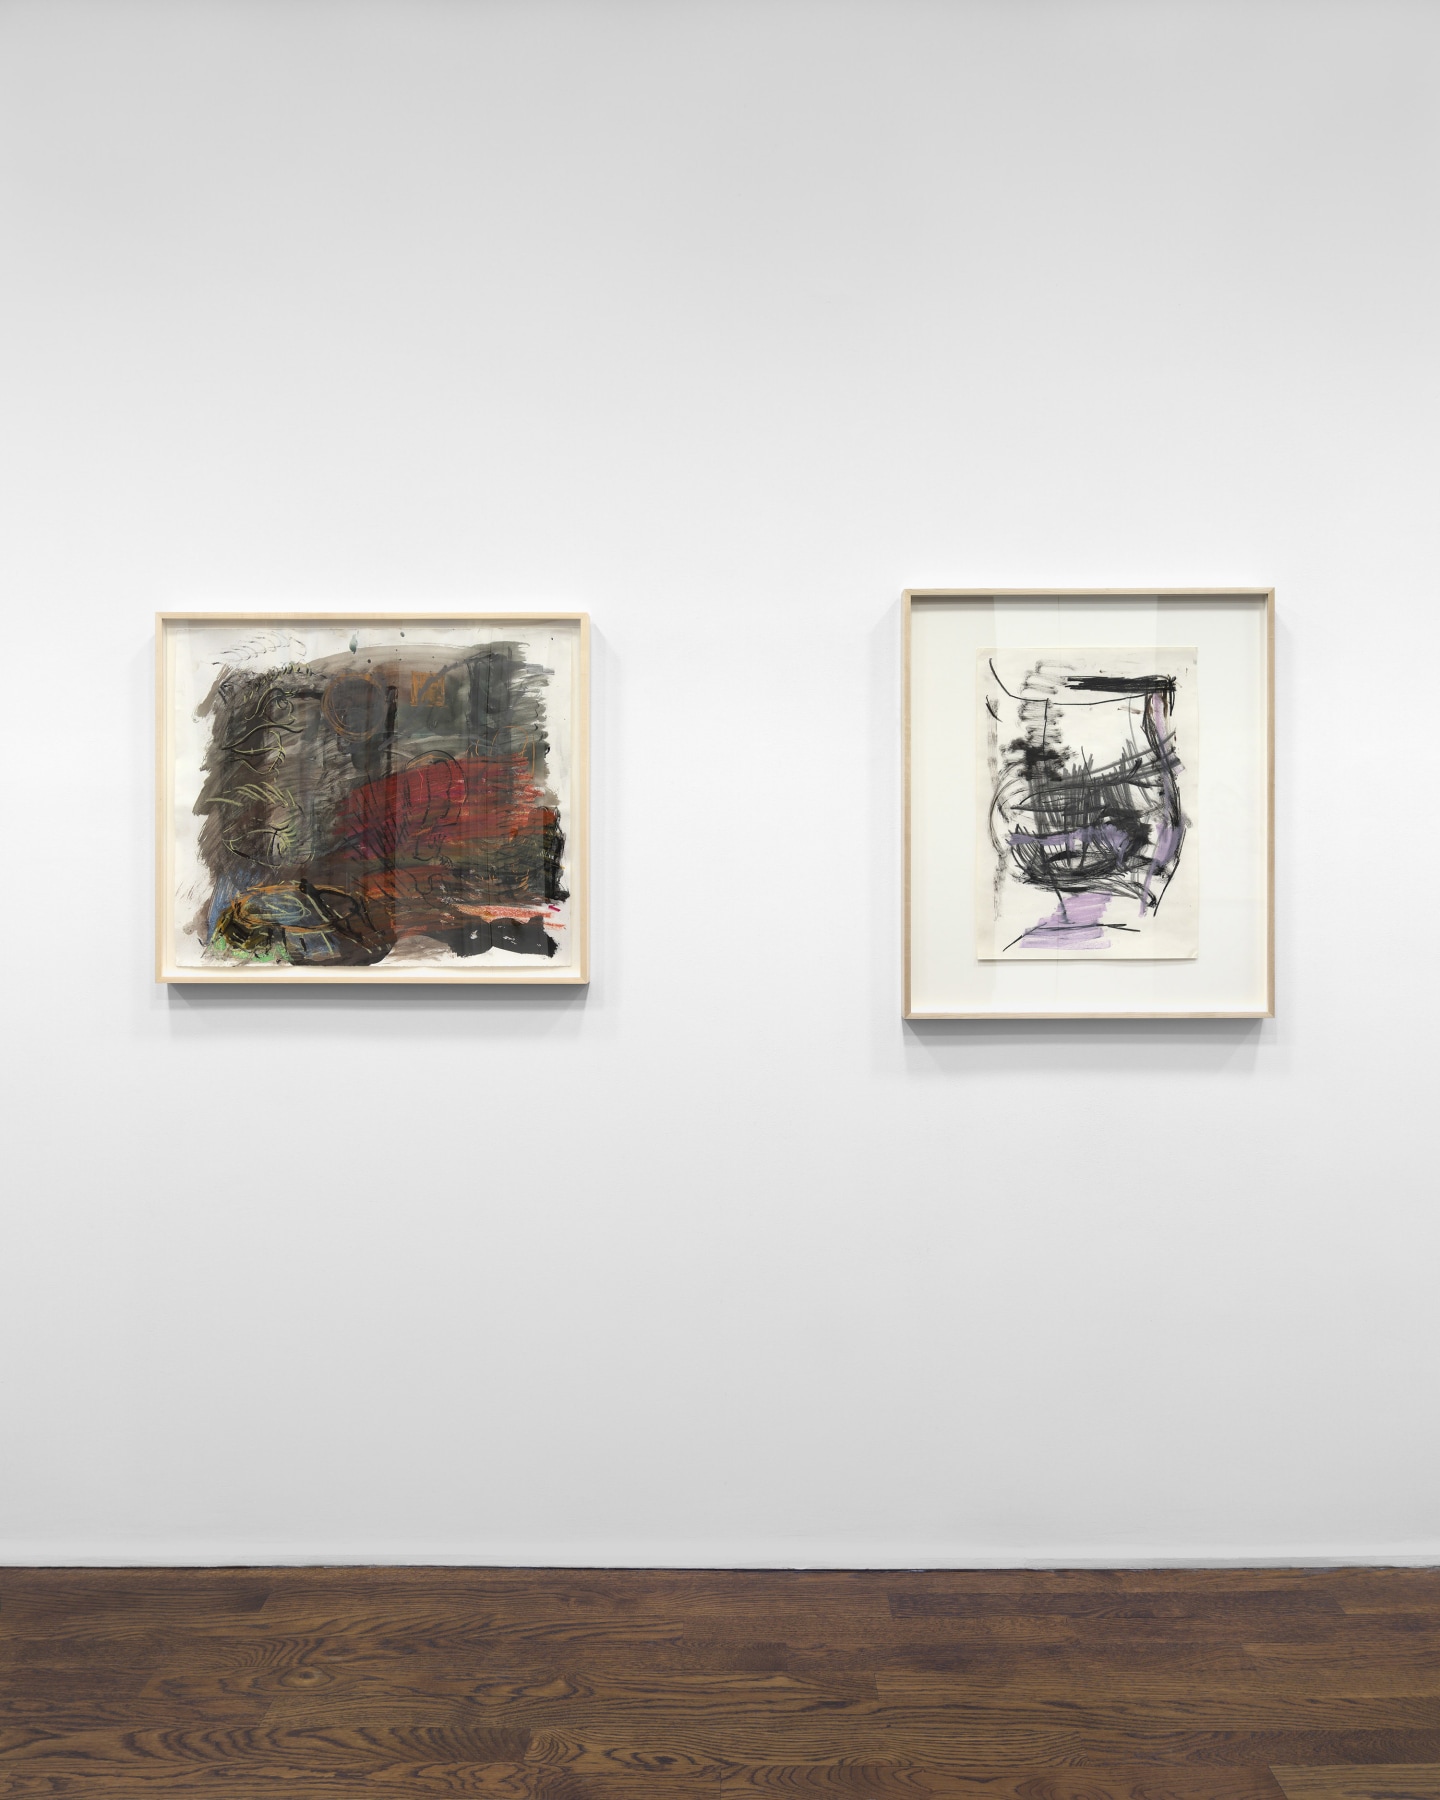 PER KIRKEBY Works on Paper, Works in Brick 20 November 2019 through 25 January 2020 UPPER EAST SIDE, NEW YORK, Installation View 10